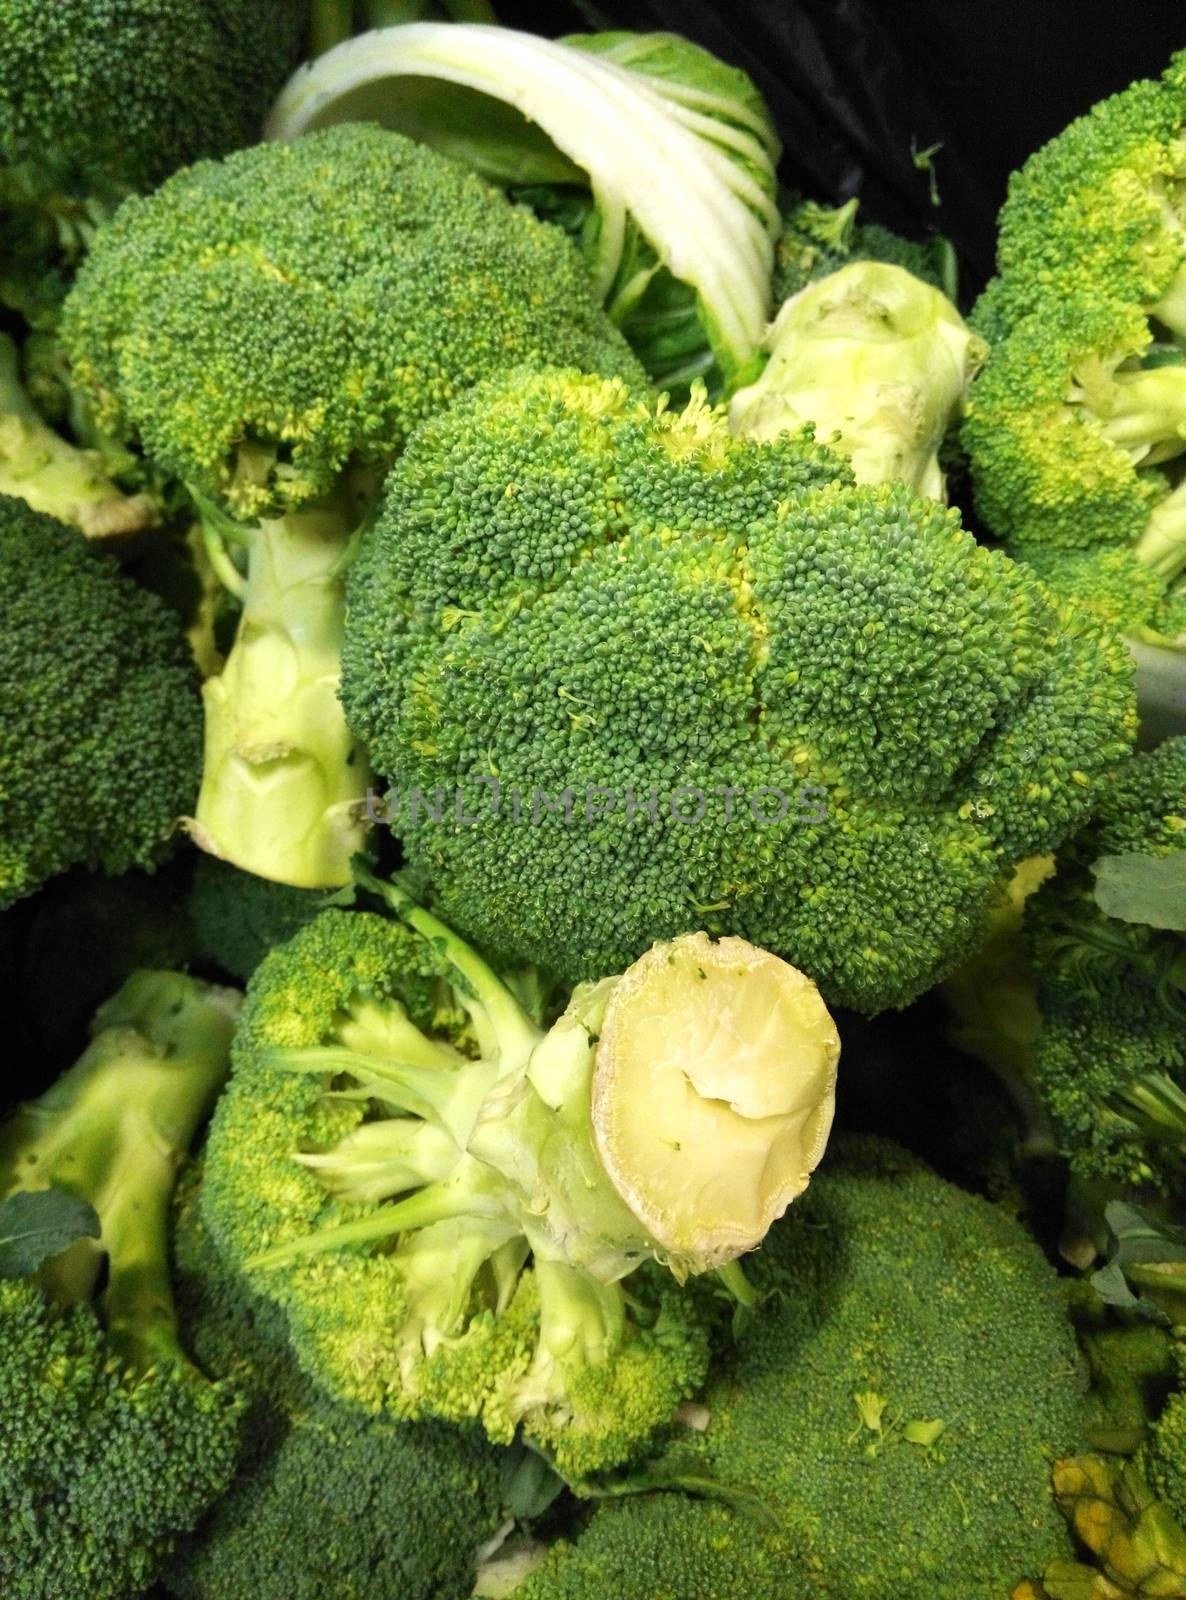 Broccoli is an edible green plant in the cabbage family by tang90246